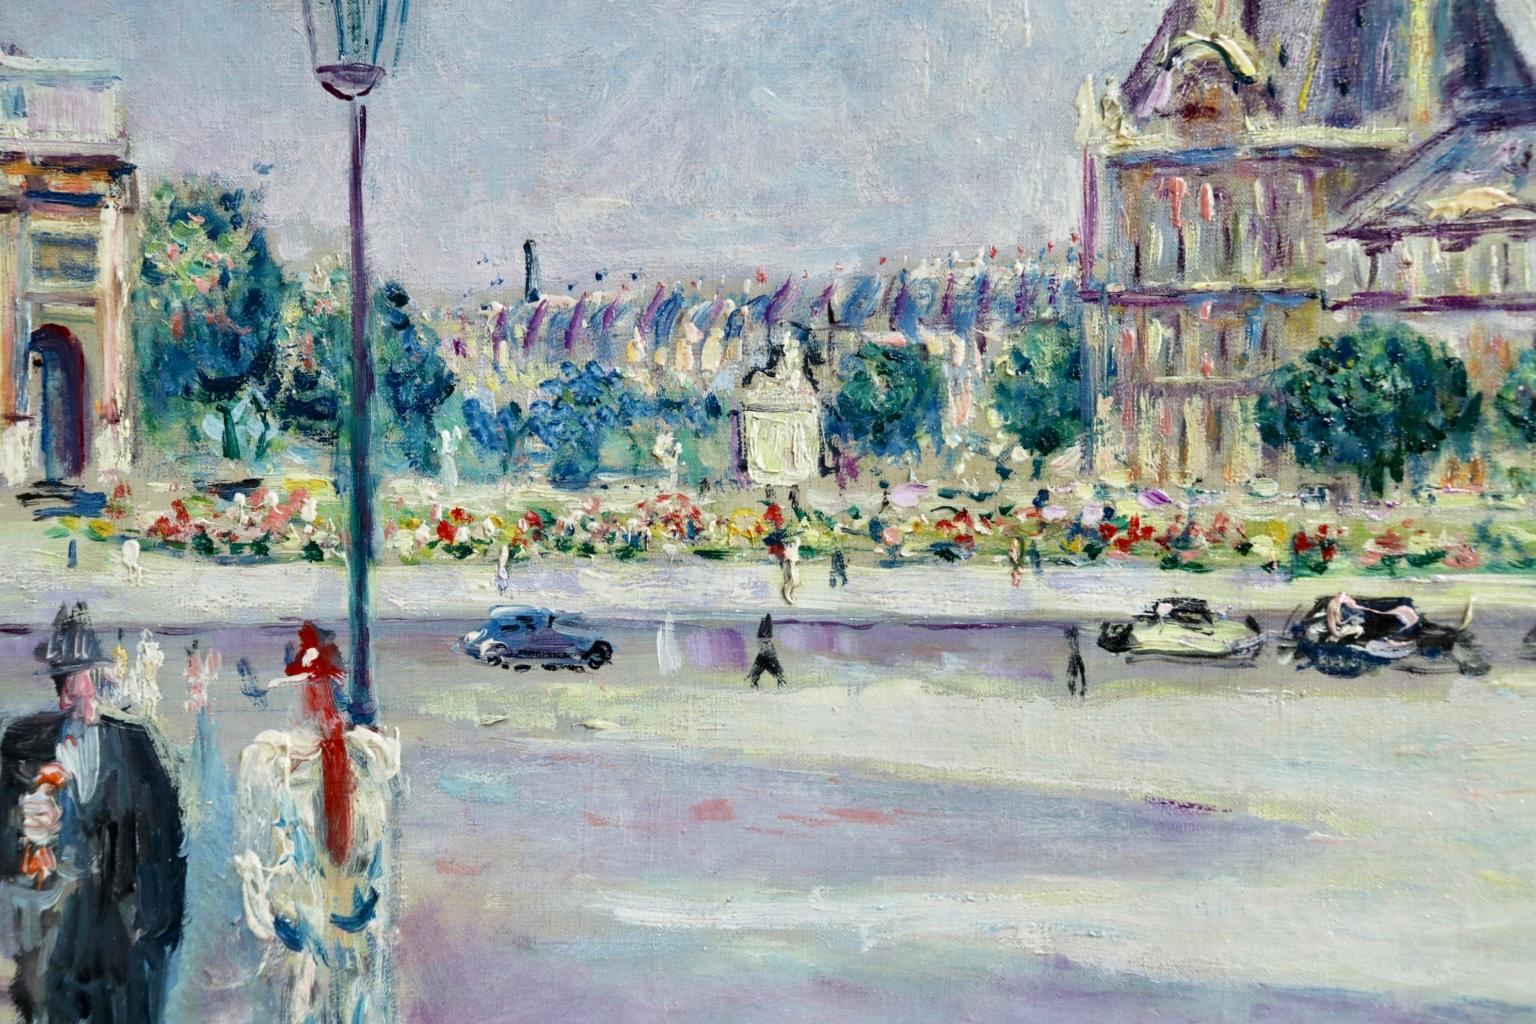 Carrousel du Louvre - Post Impressionist Oil, Figures in Cityscape by L Adrion - Gray Figurative Painting by Lucien Adrion